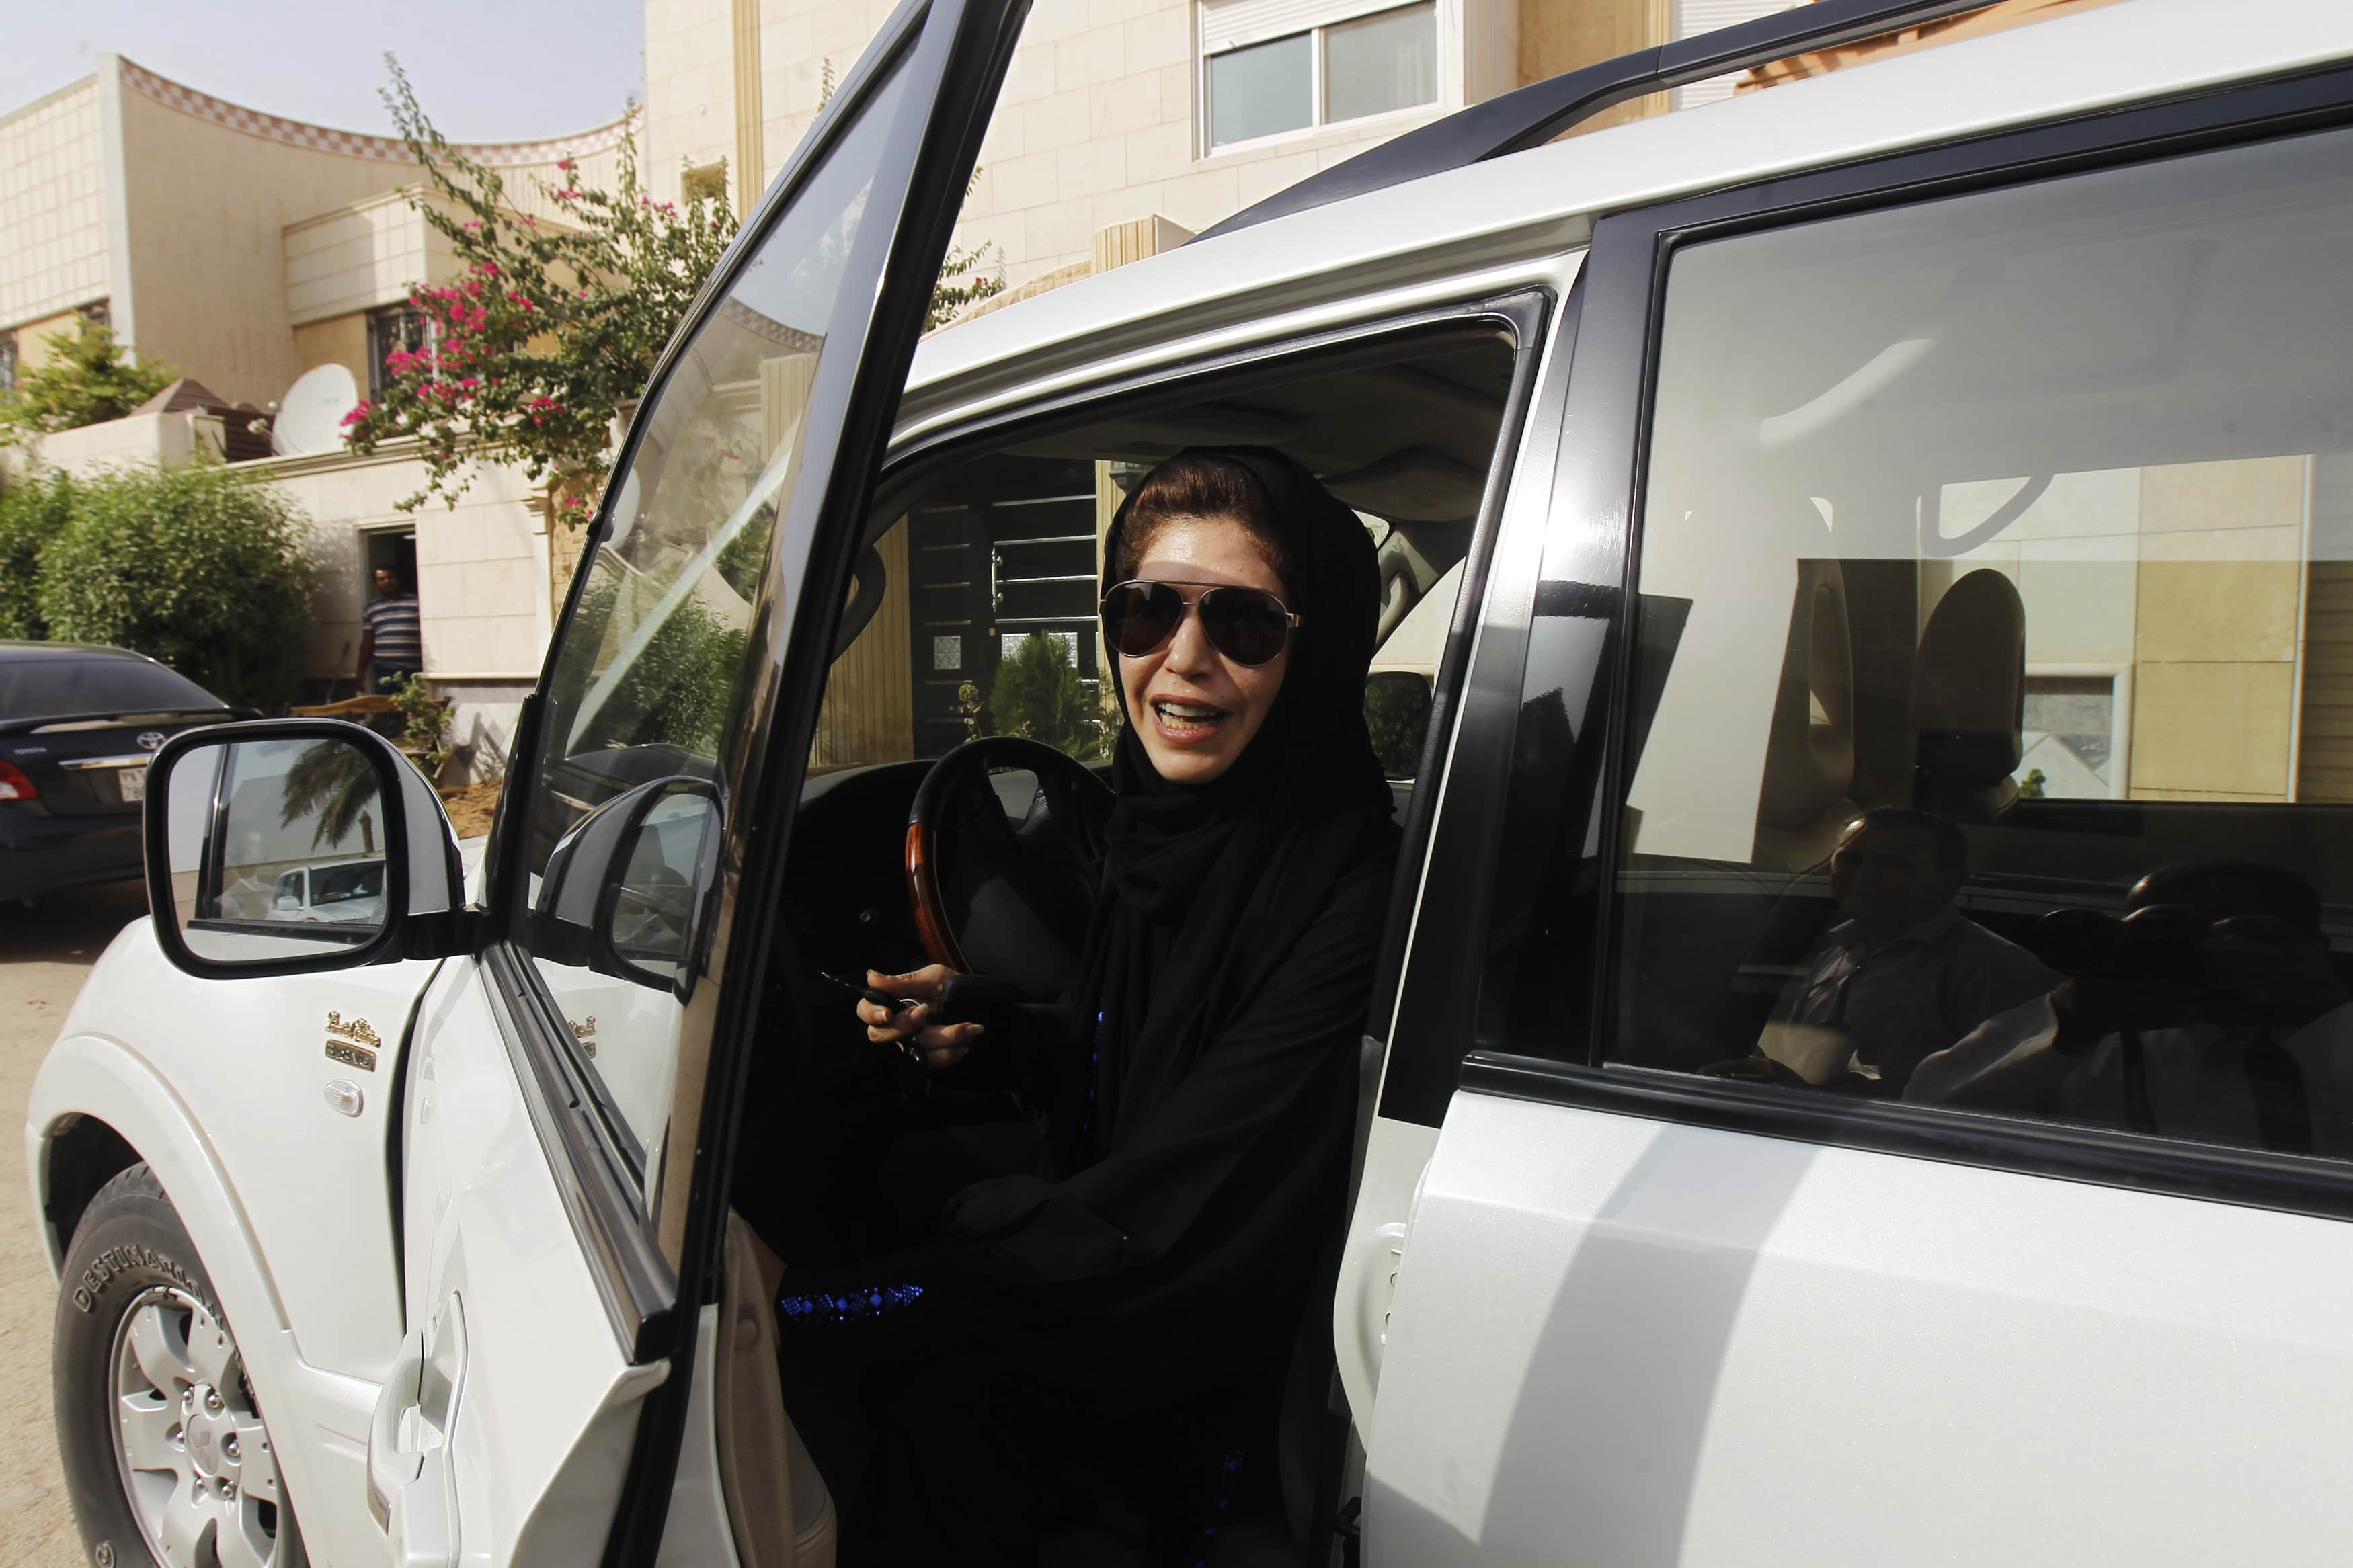 Female driver Azza Al Shmasani alights from her car after driving in defiance of the ban in Riyadh on 22 June 2011, REUTERS/Fahad Shadeed